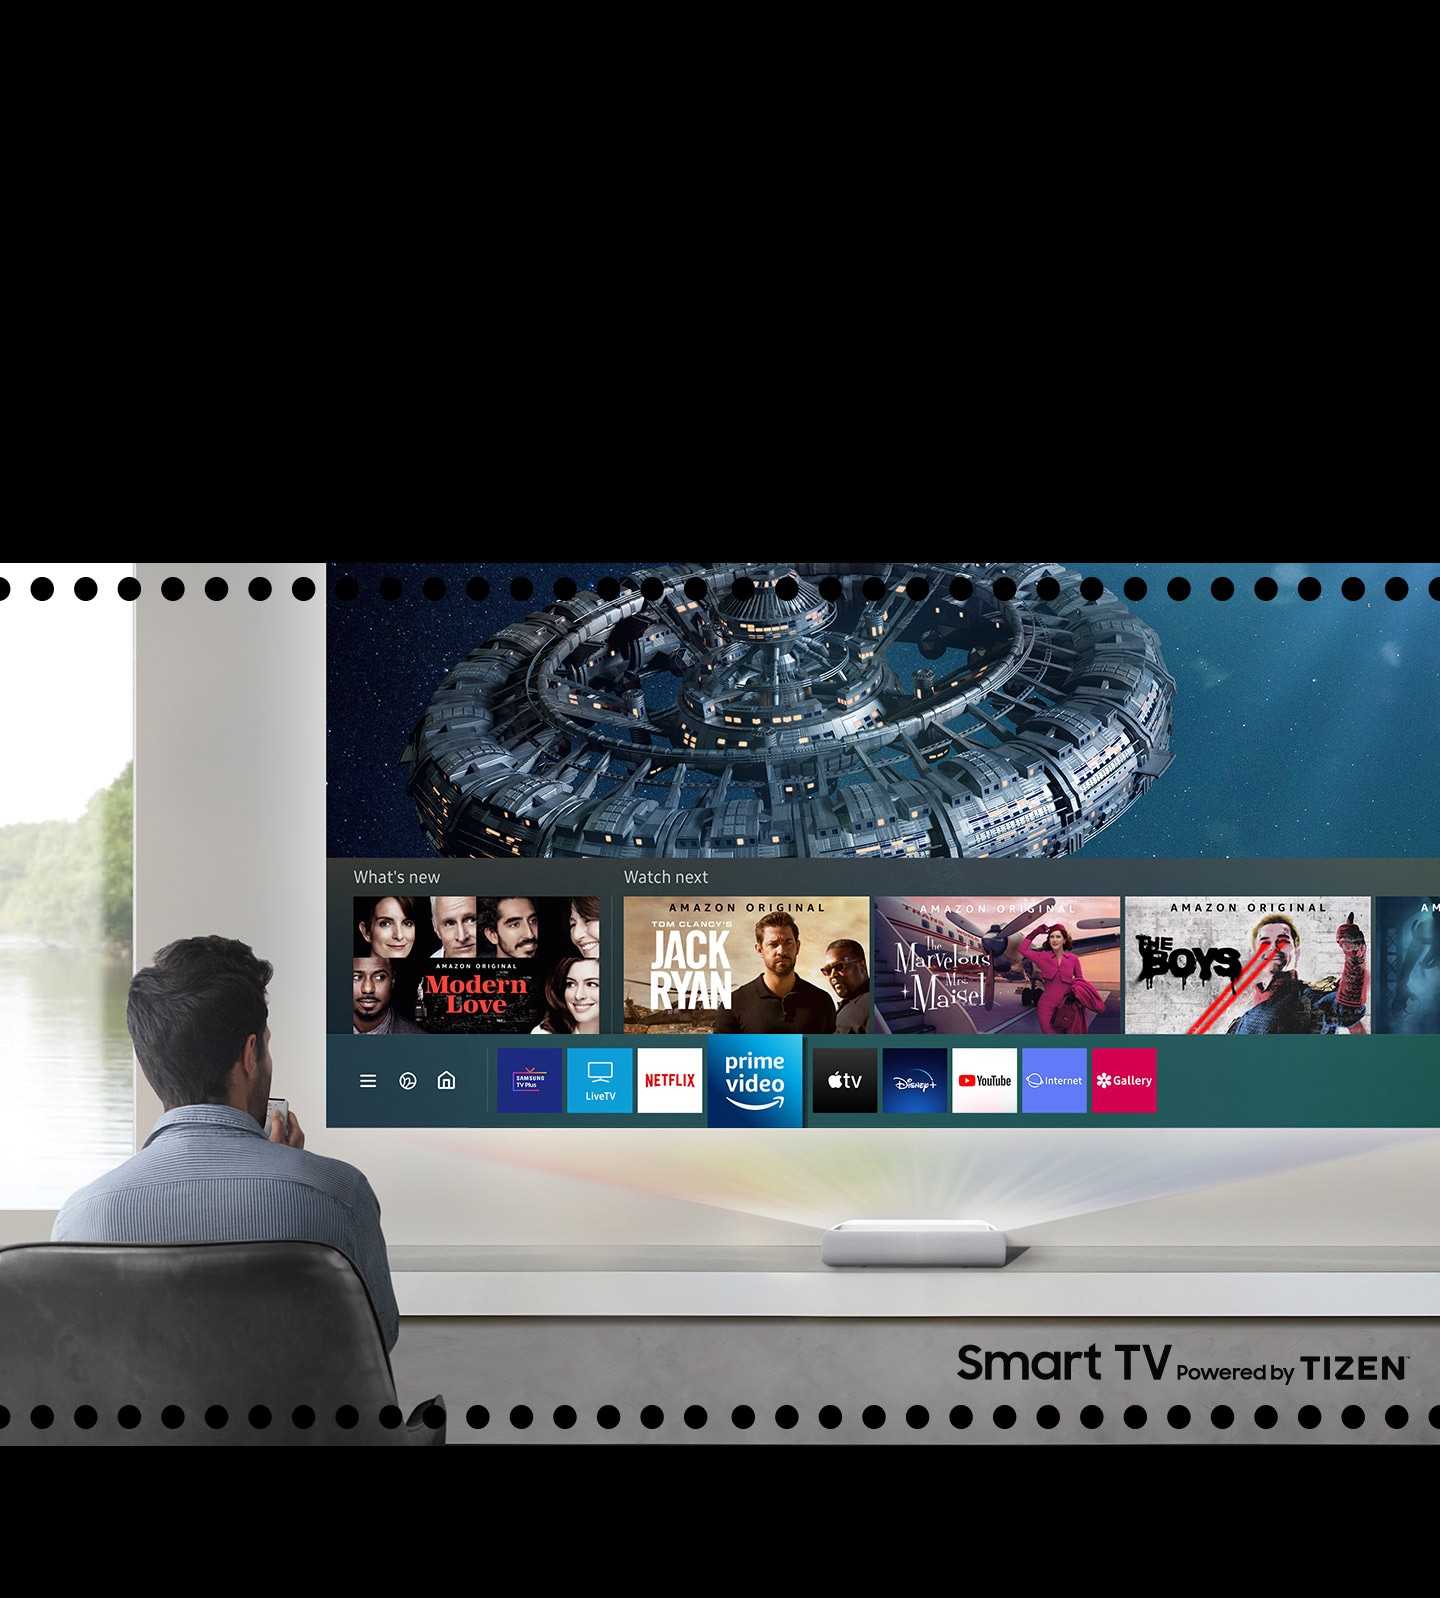 During use The Premiere, a man is considering what to see among the various contents like Samsung Smart TV recommended.